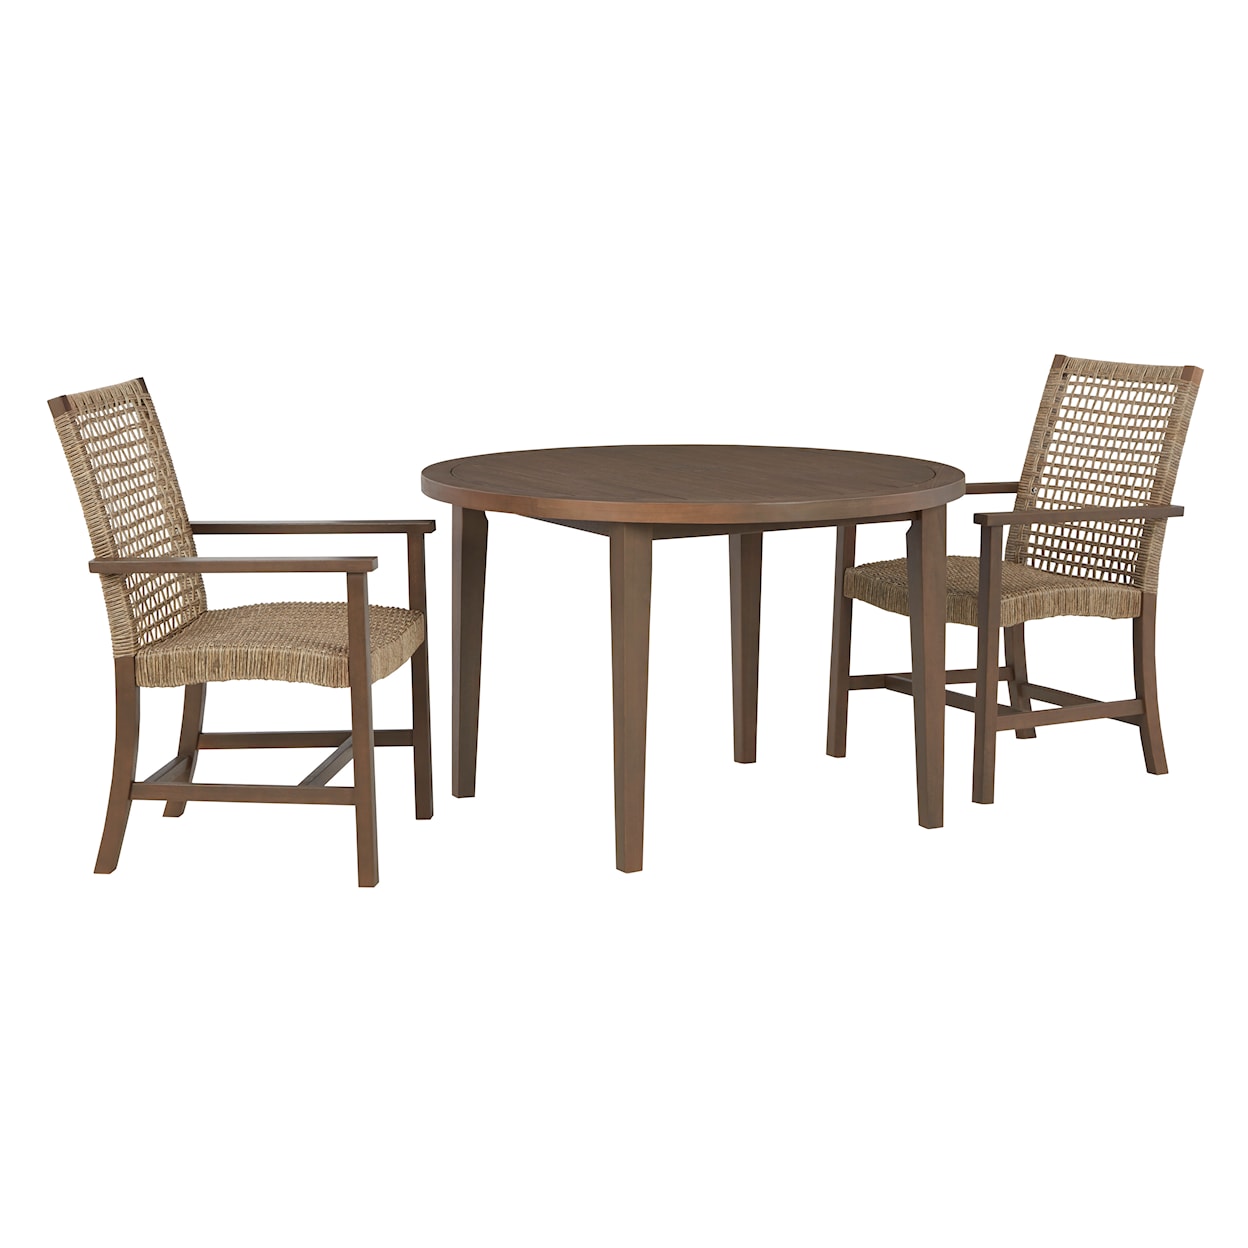 Signature Design Germalia Outdoor Dining Table and 2 Chairs